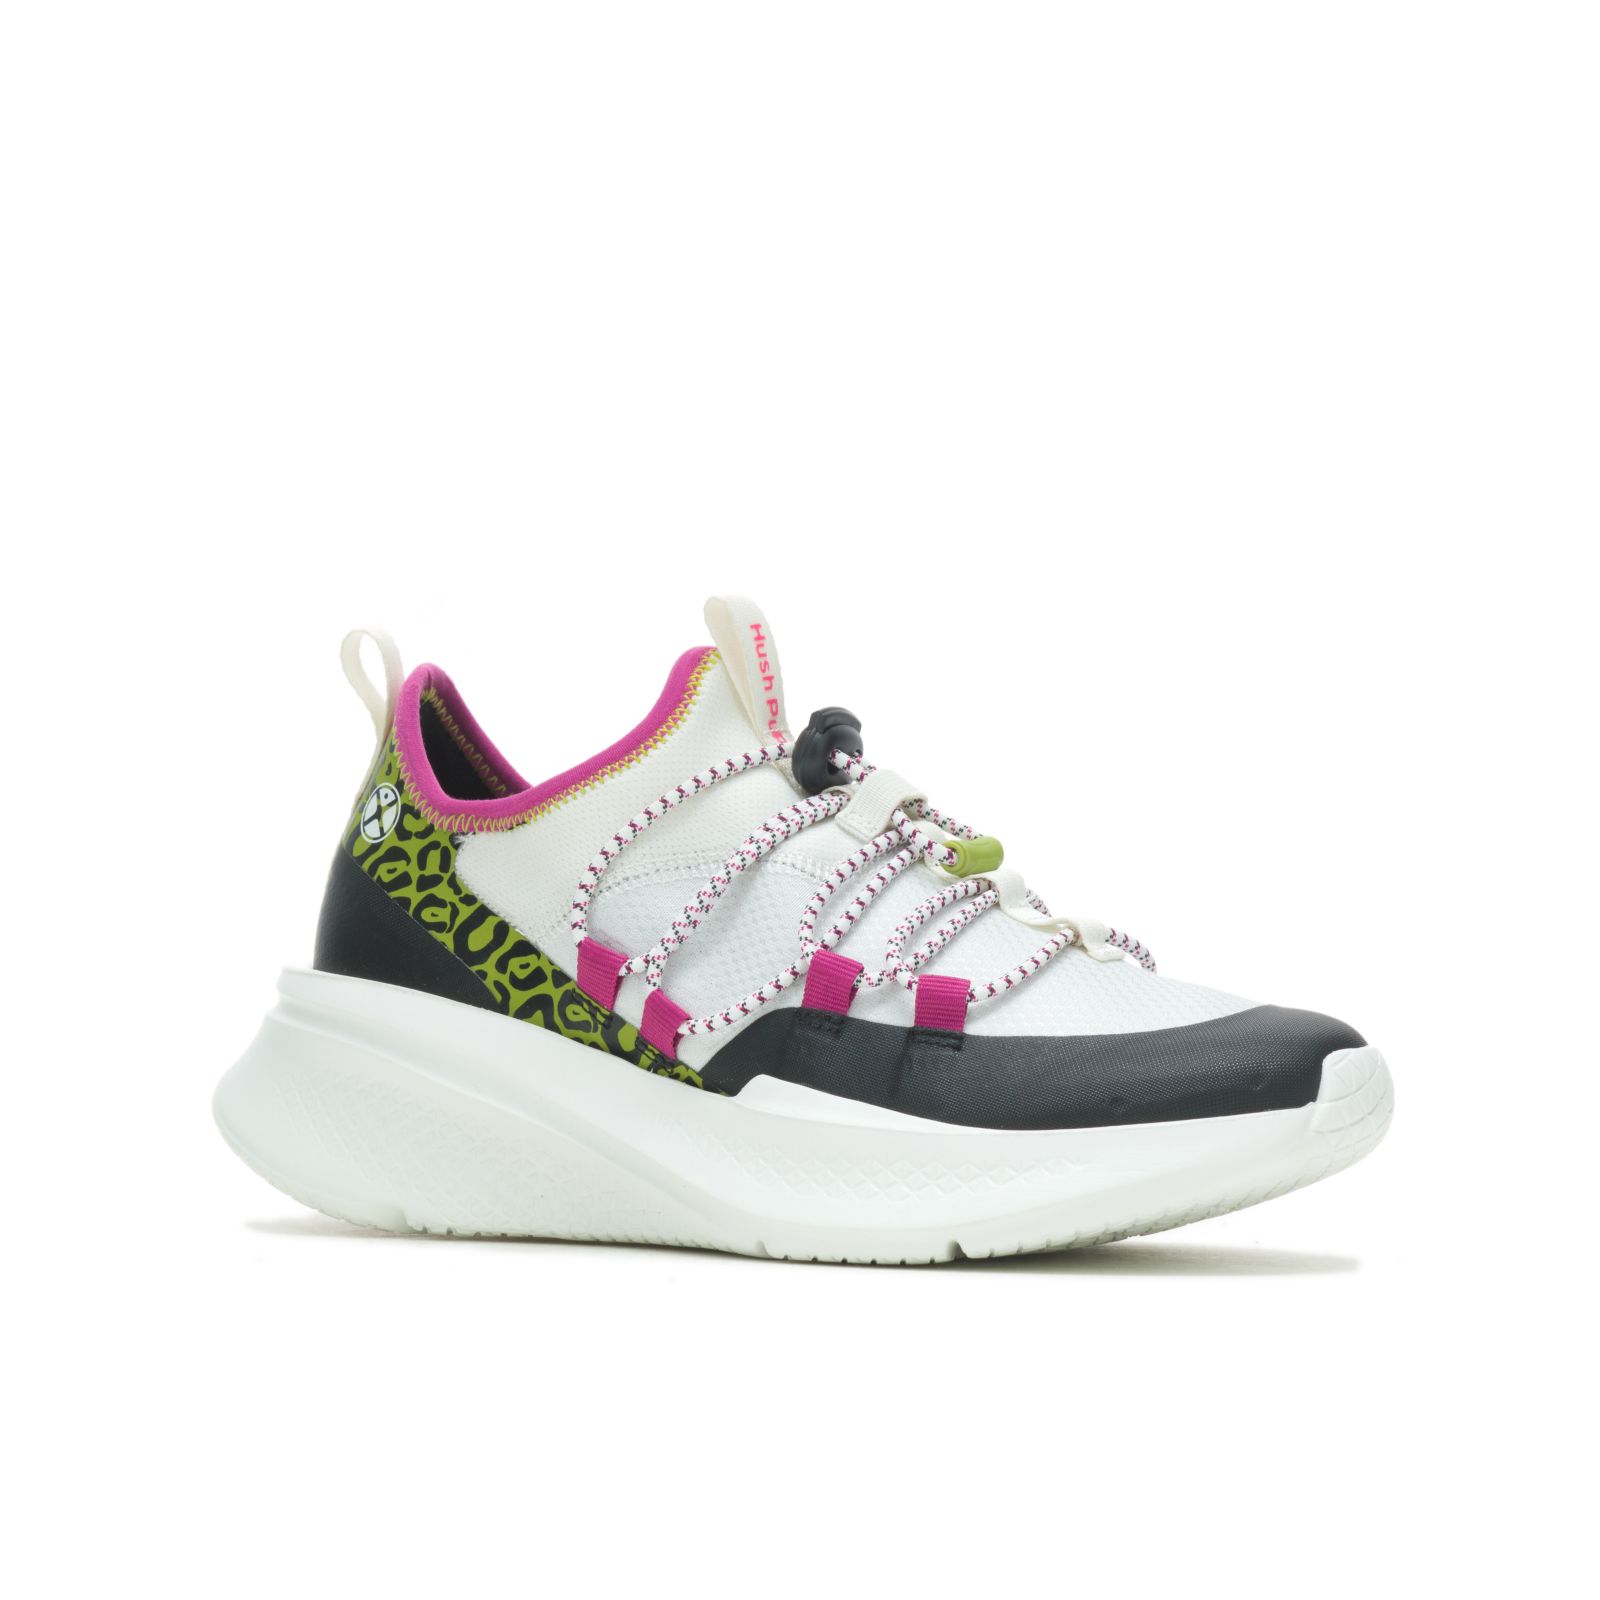 Tenis Hush Puppies Spark Bungee Mujer Blancos Multicolor | UAPSZMD-70